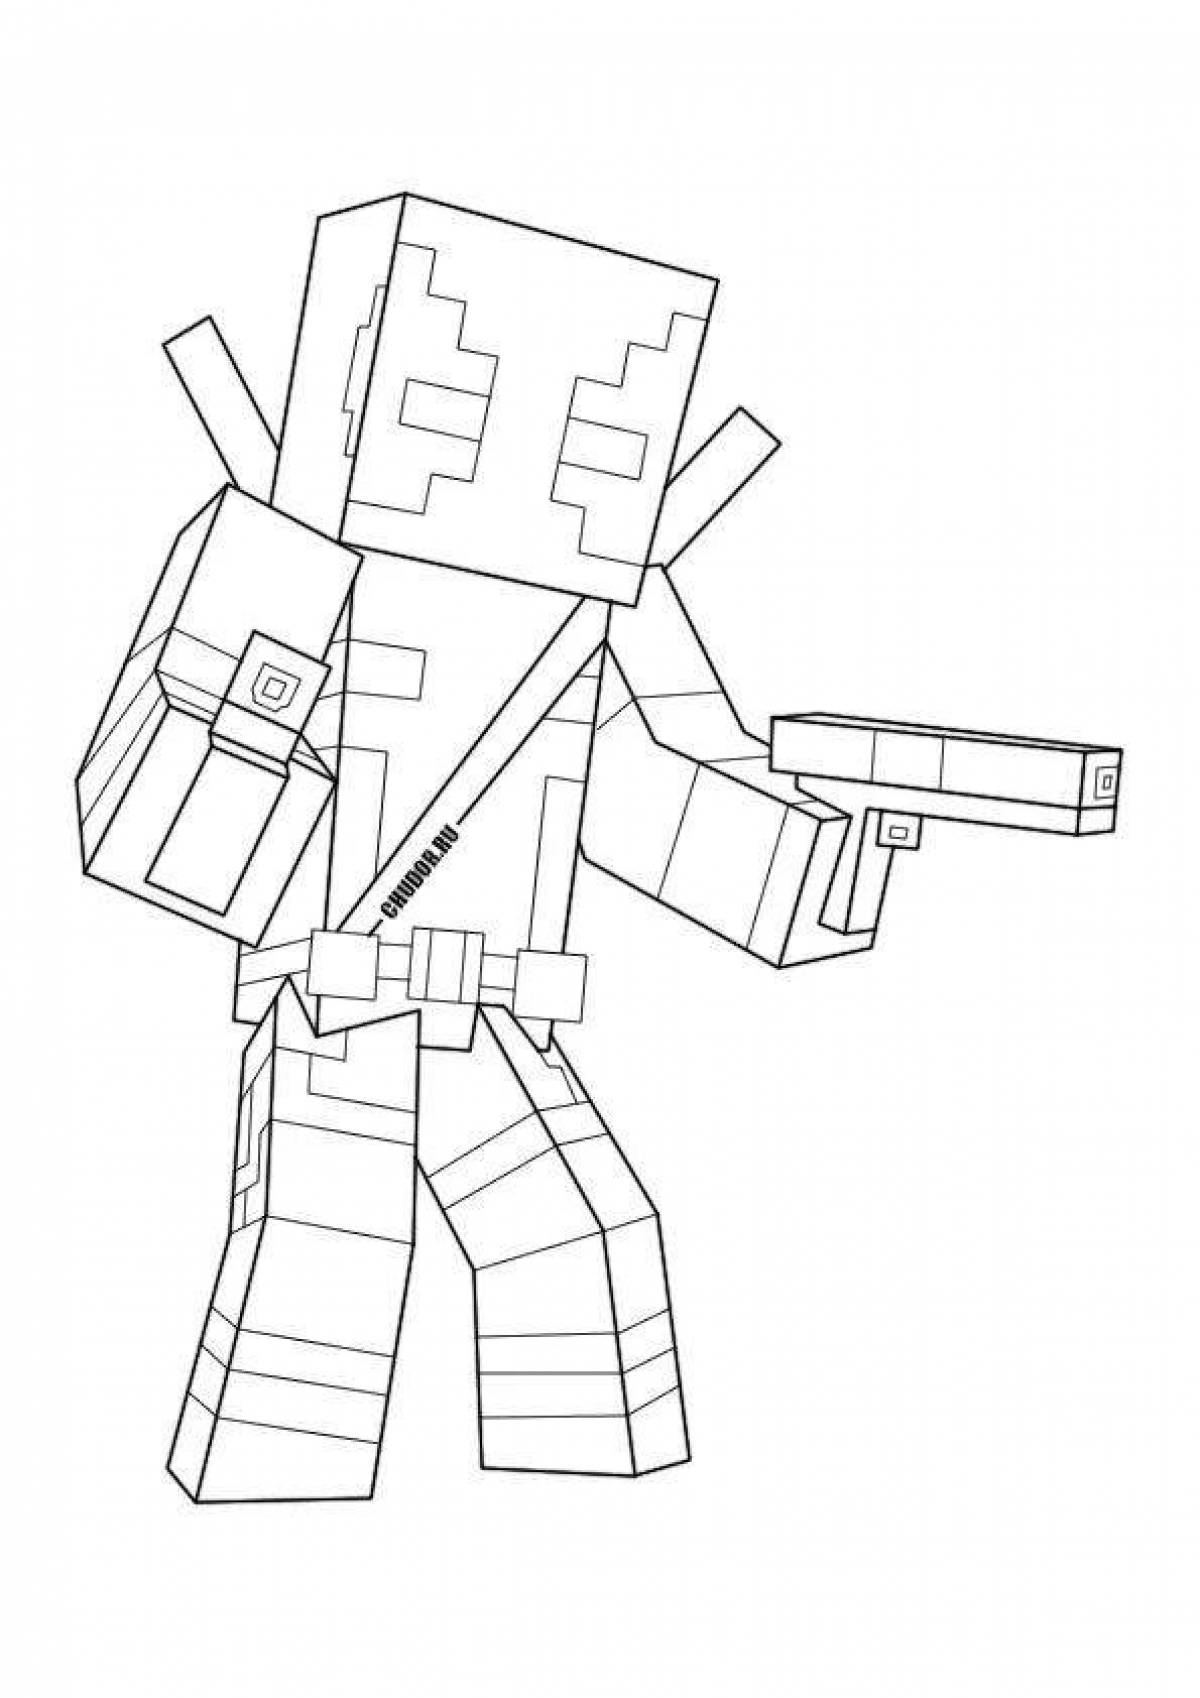 Exciting minecraft man coloring book